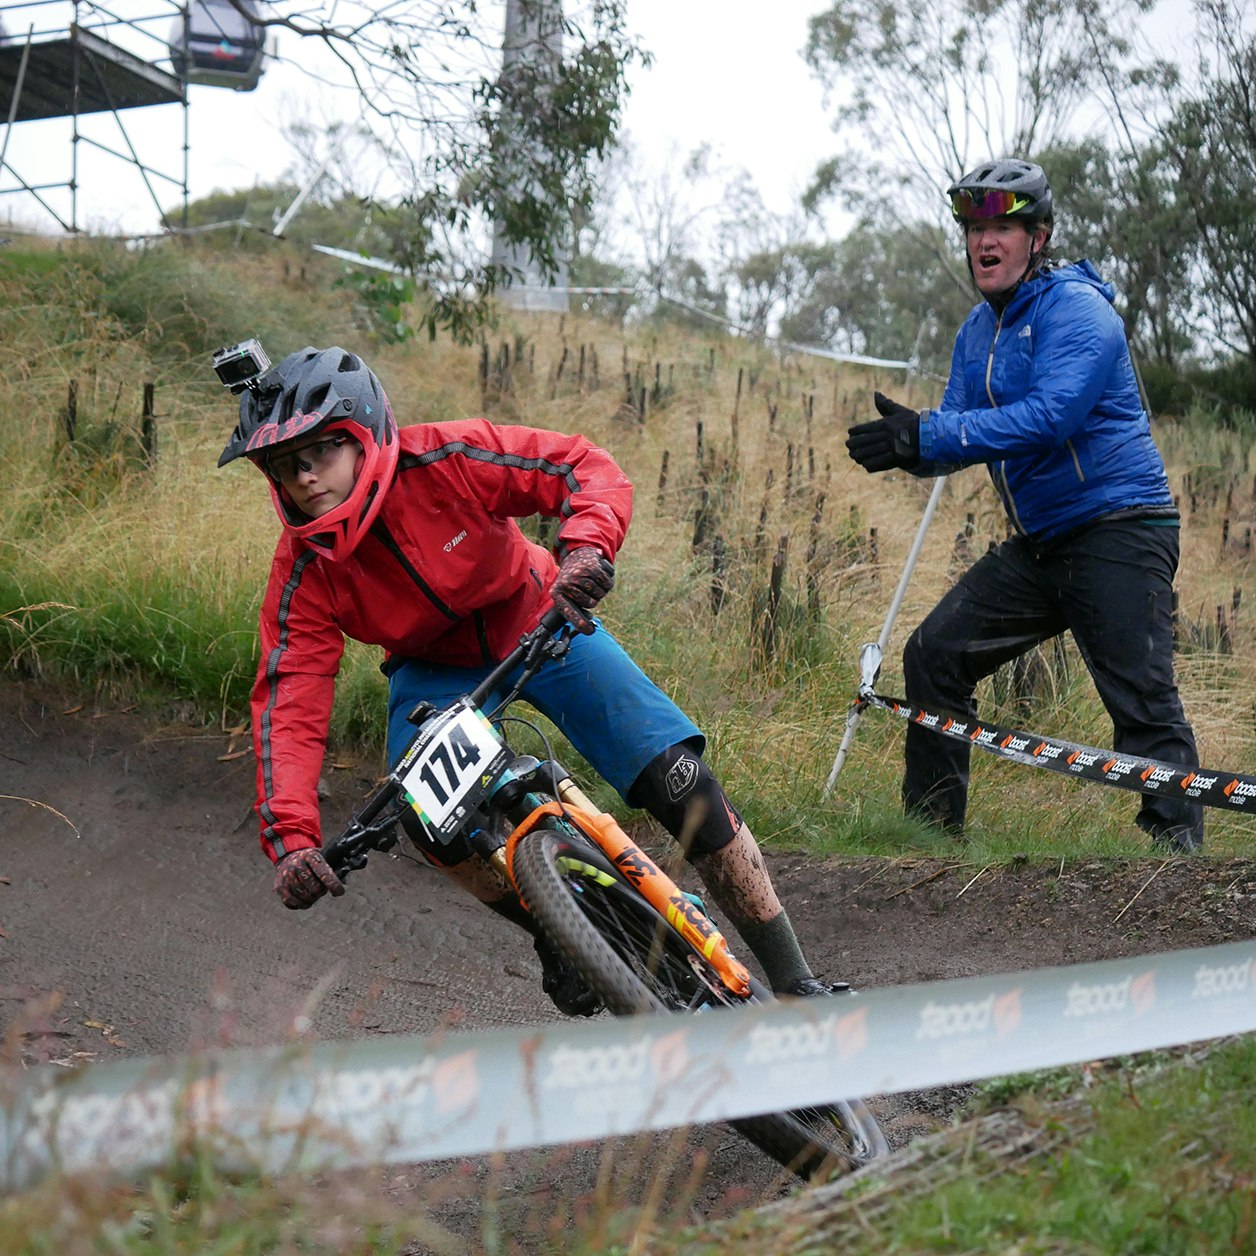 Mountain bike coach encouraging student on track